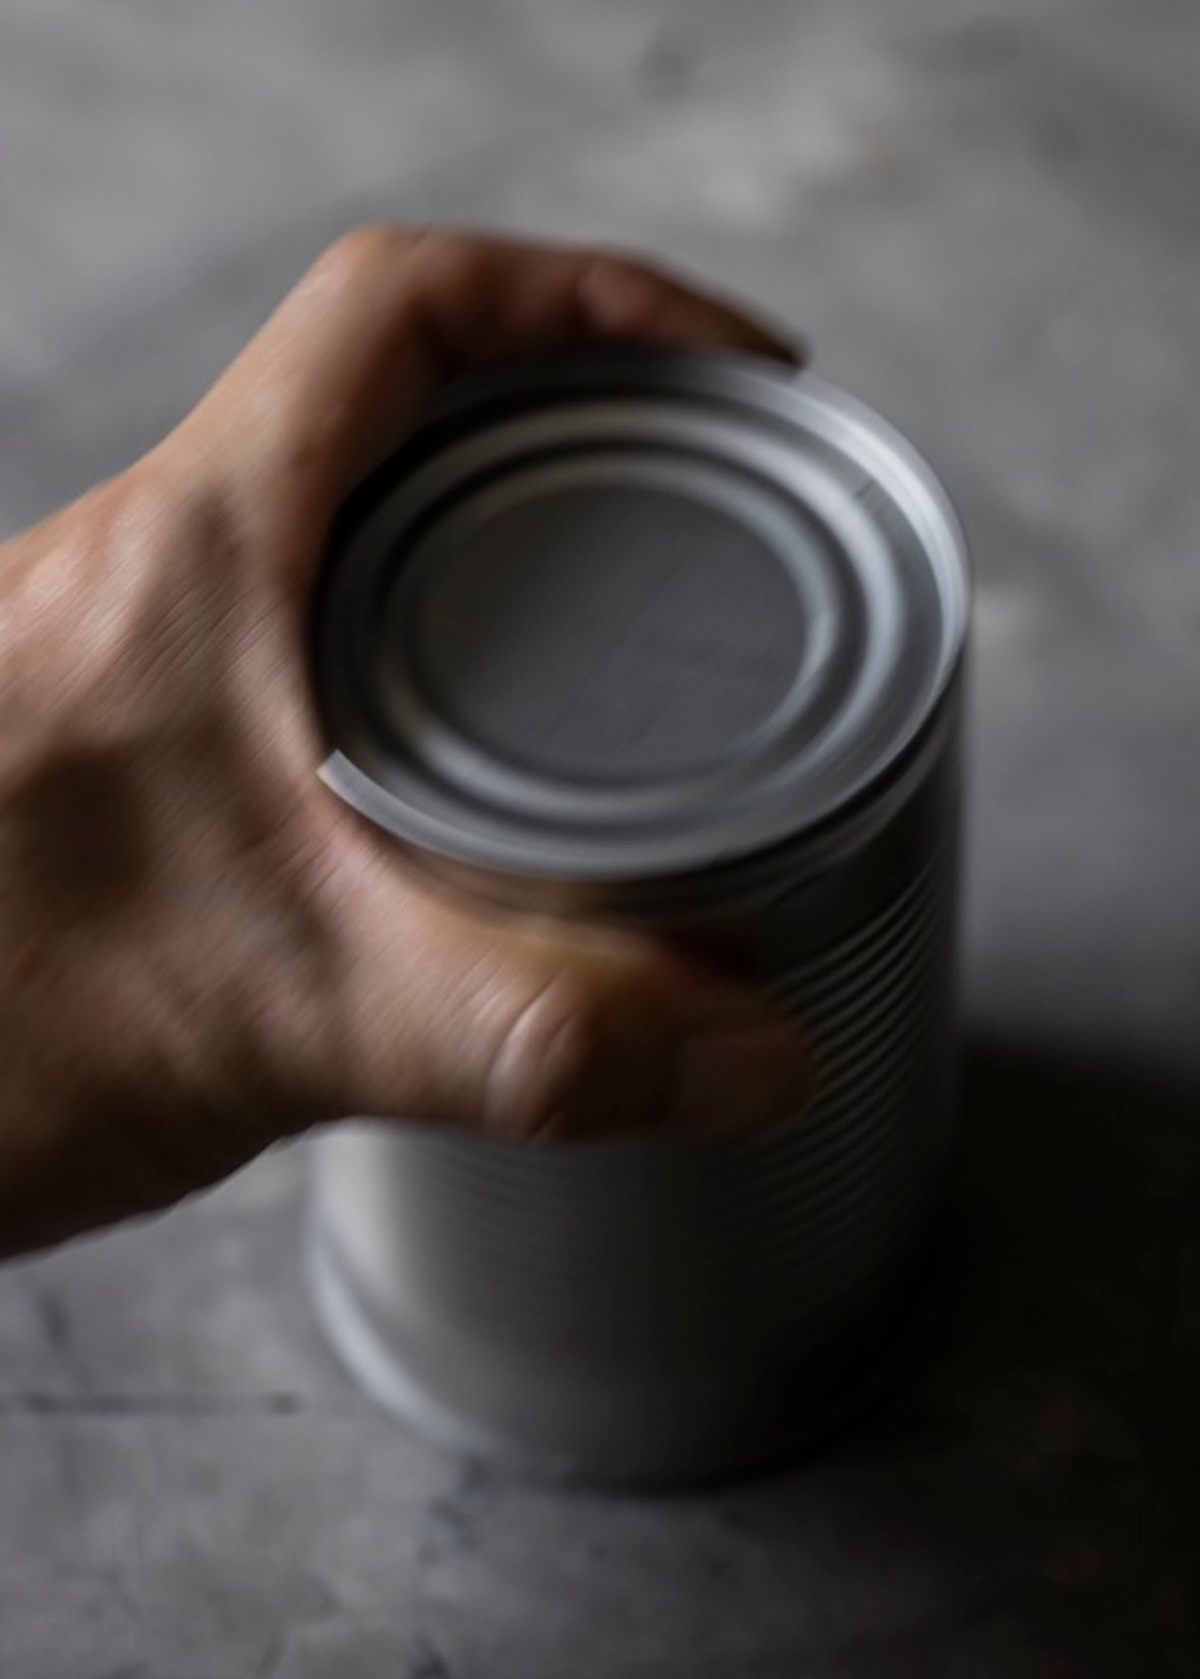 To open a can purchased from the commissary, masak cooks would shave the rim off against the concrete floor before slamming it down to remove the lid.